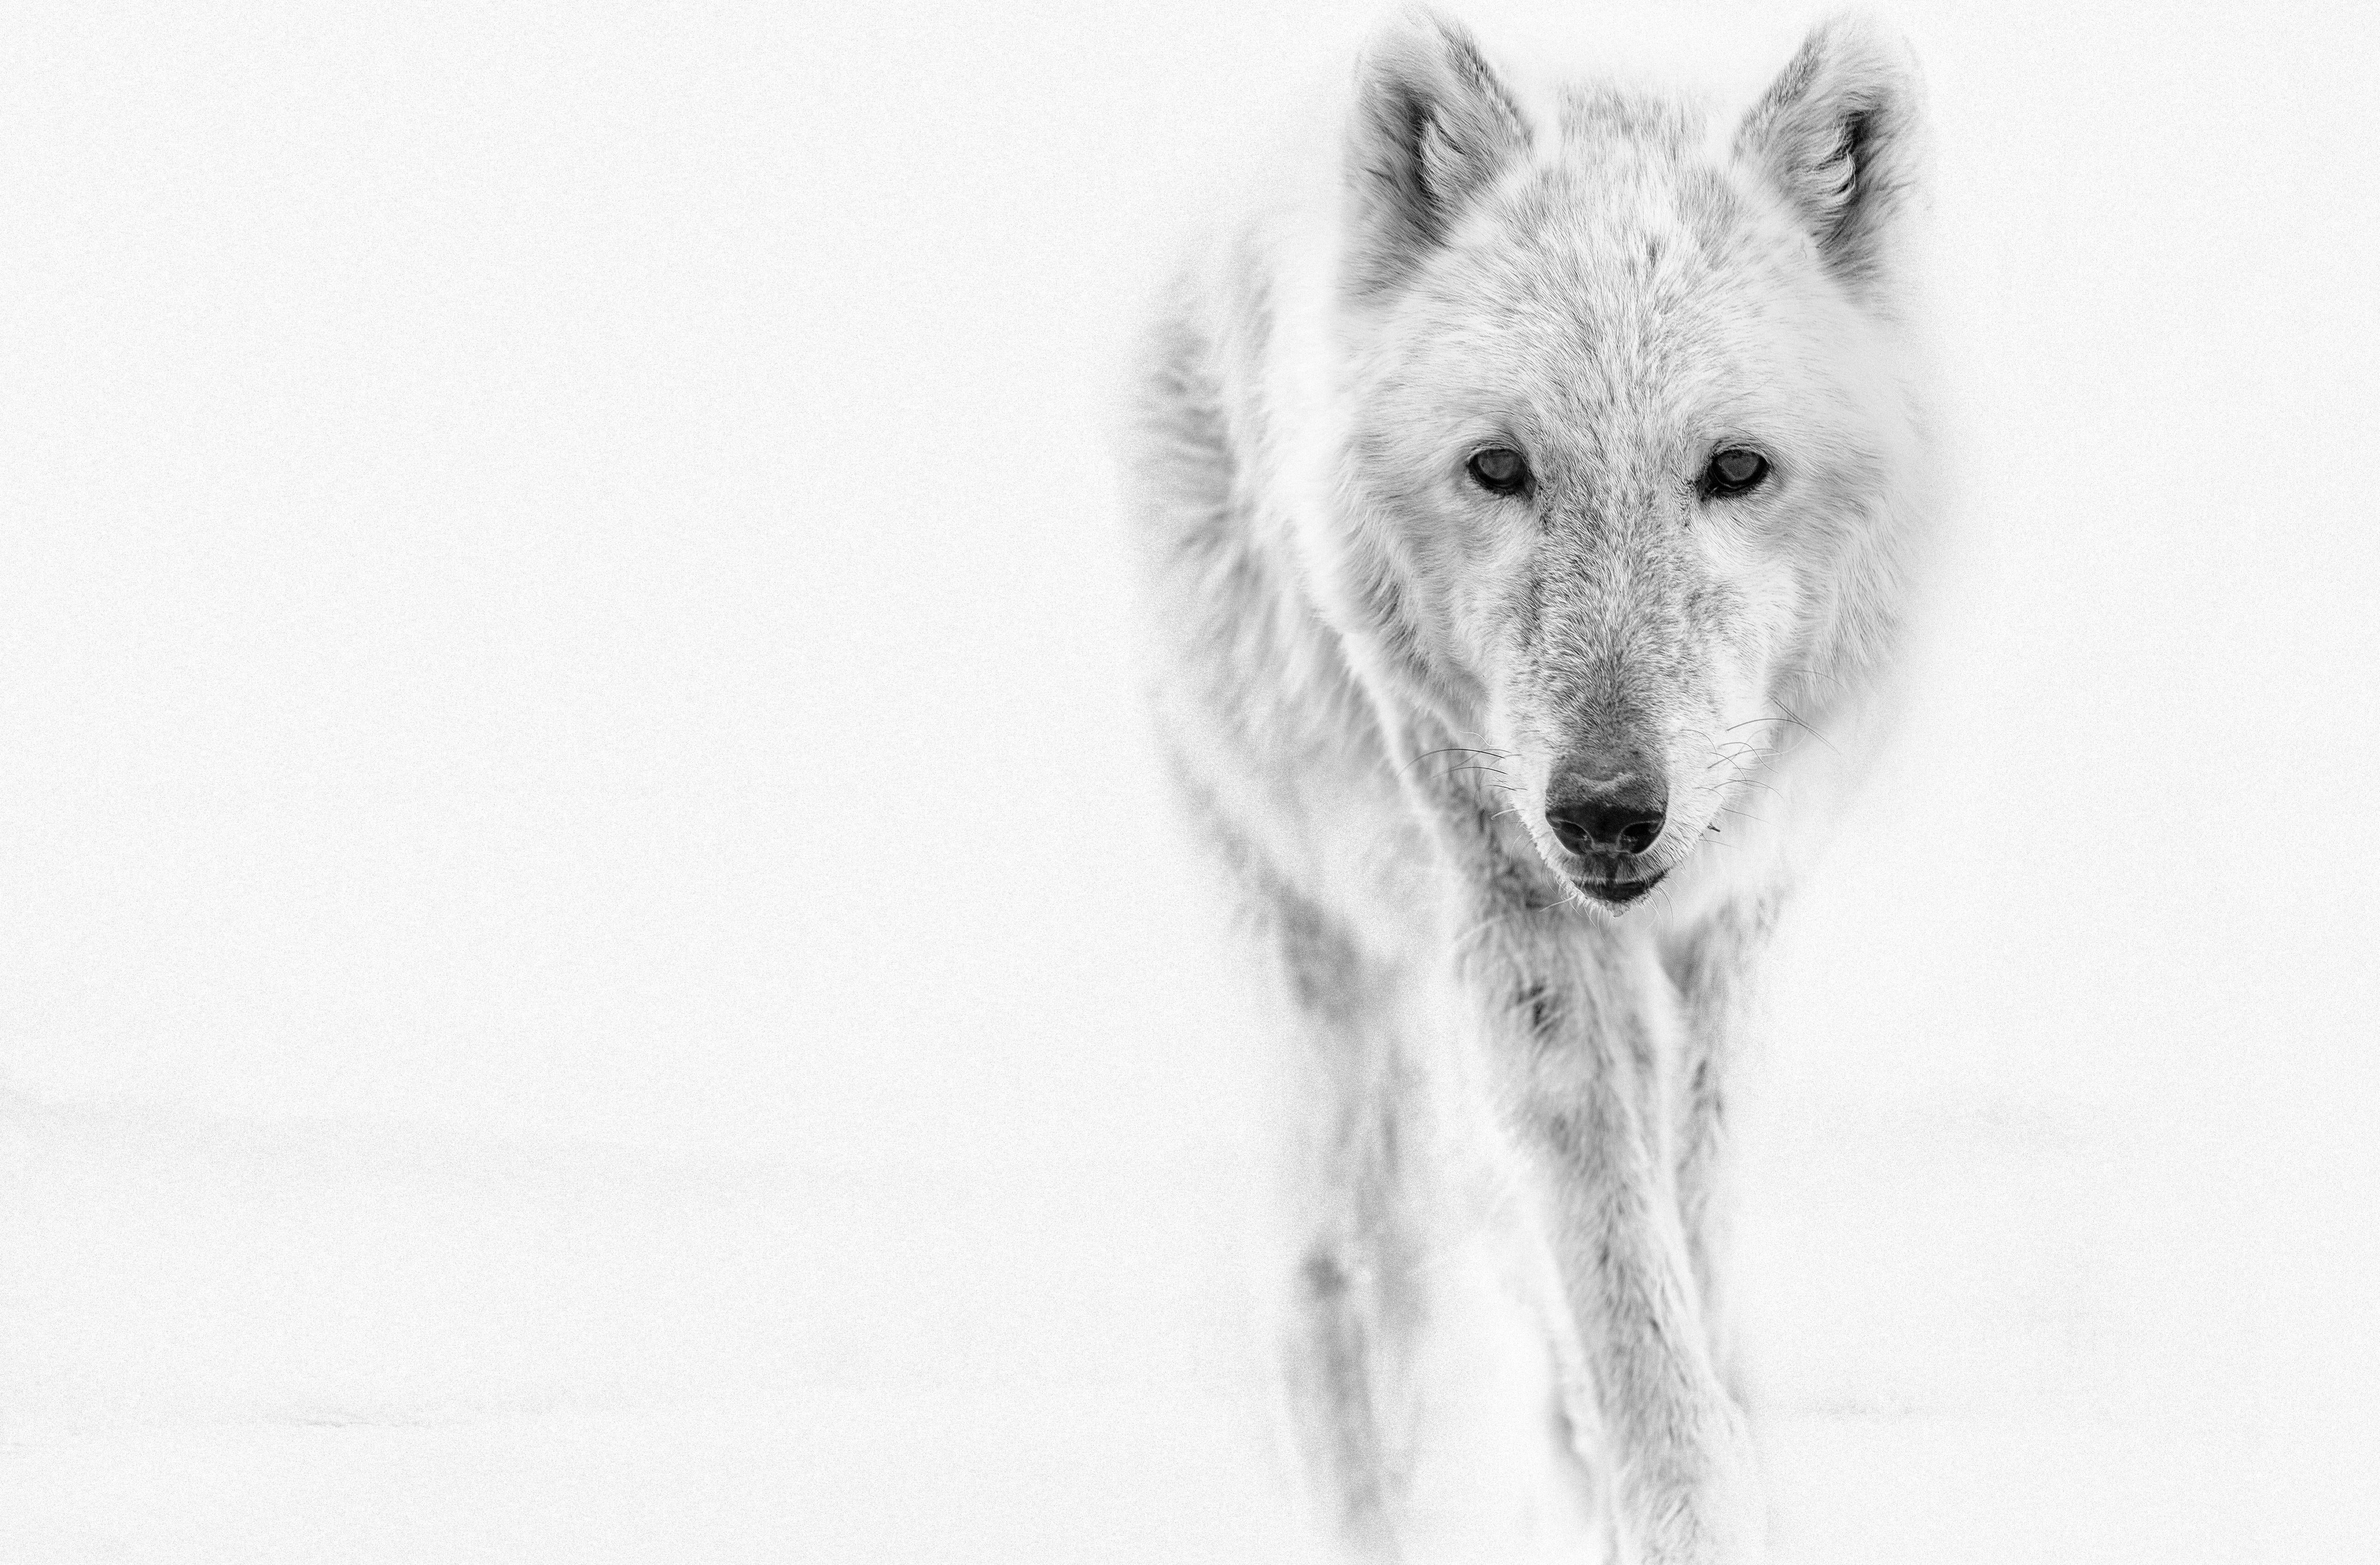 This is a contemporary black and white photograph of an Arctic Wolf by wildlife photographer Shane Russeck
Edition of 50. 
Signed by and numbered
Printed on archival paper using only archival inks. 

Framing available. Inquire for rates. 

Free